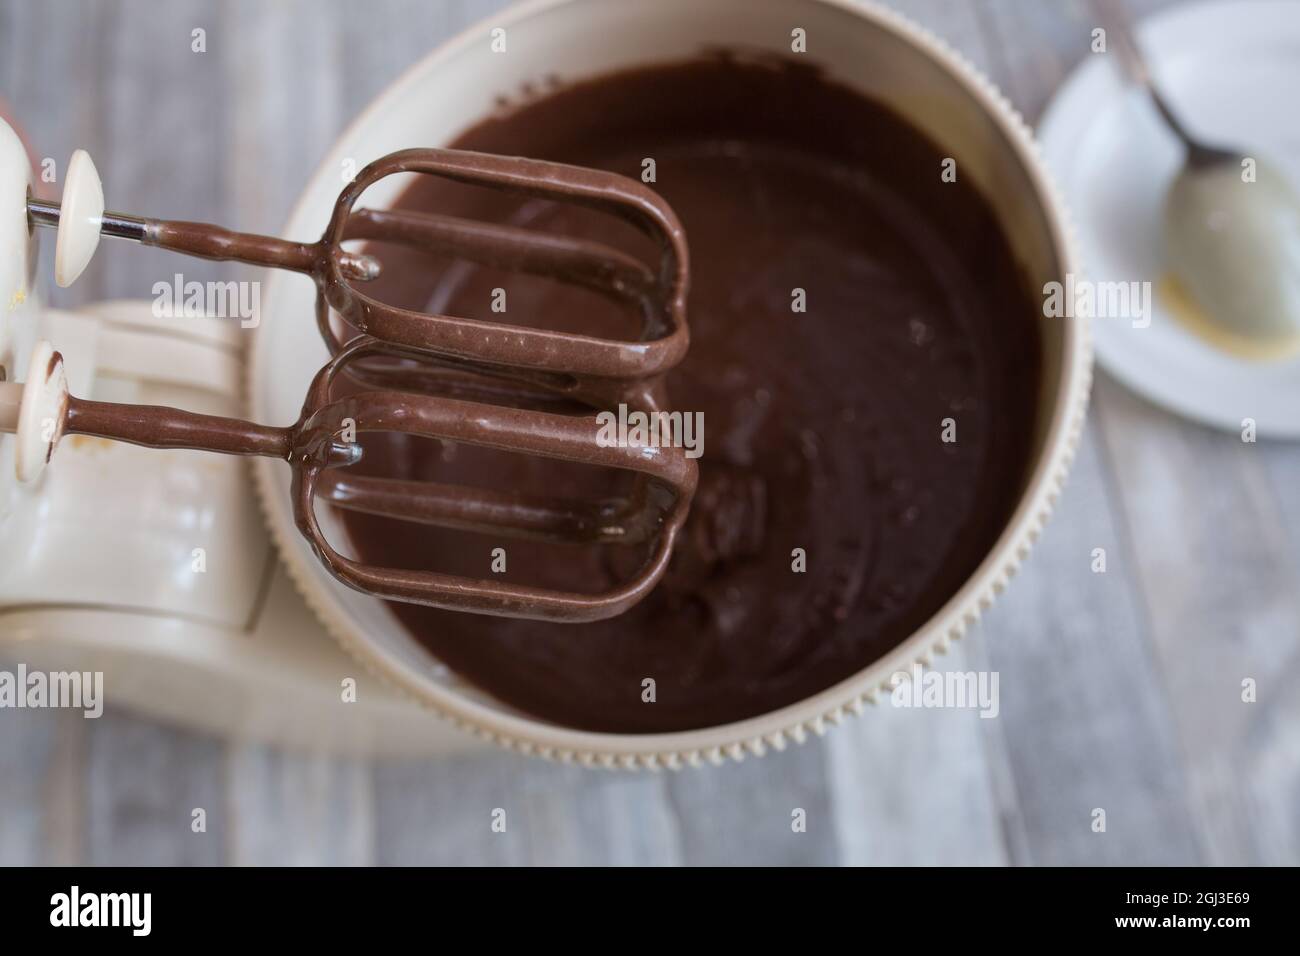 Cake making process. The dough is ready. The mixer beaters are stopped. Step by step recipe for chocolate cake. Series. Baking concept. Stock Photo